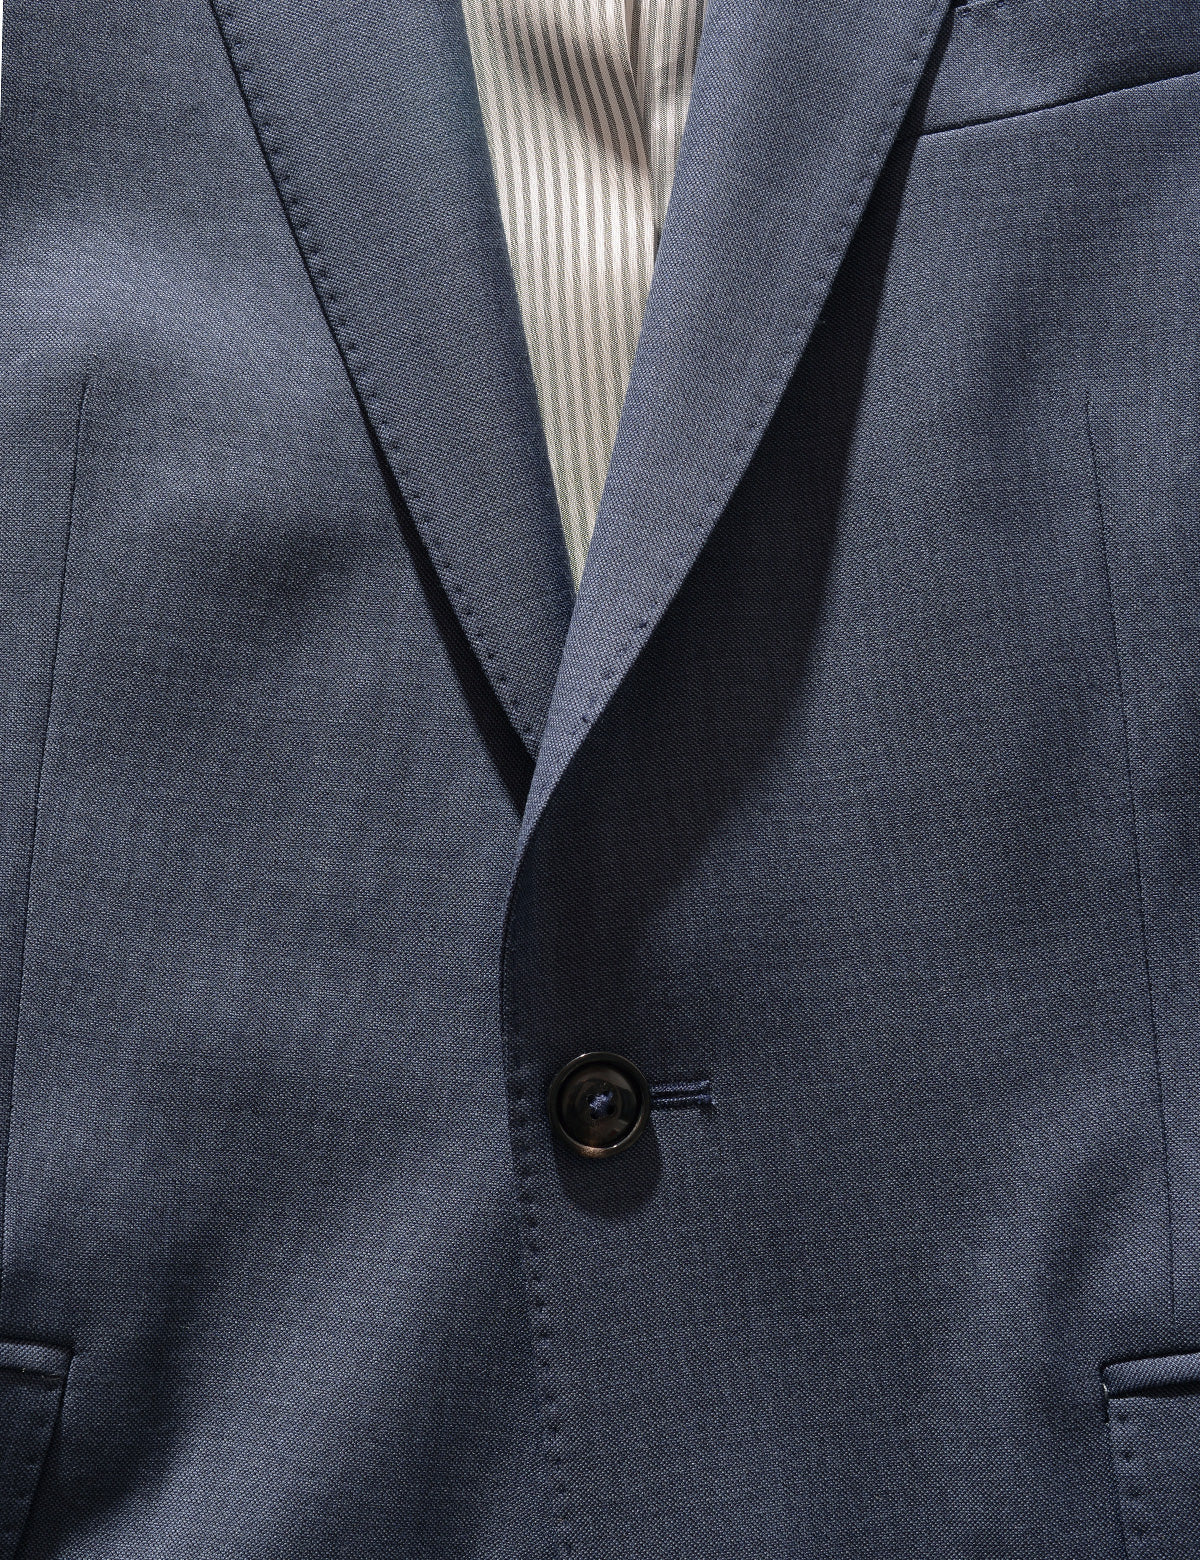 Detail shot of Brooklyn Tailors BKT50 Tailored Jacket in Wool Sharkskin - Haze Blue showing label, lining, and button